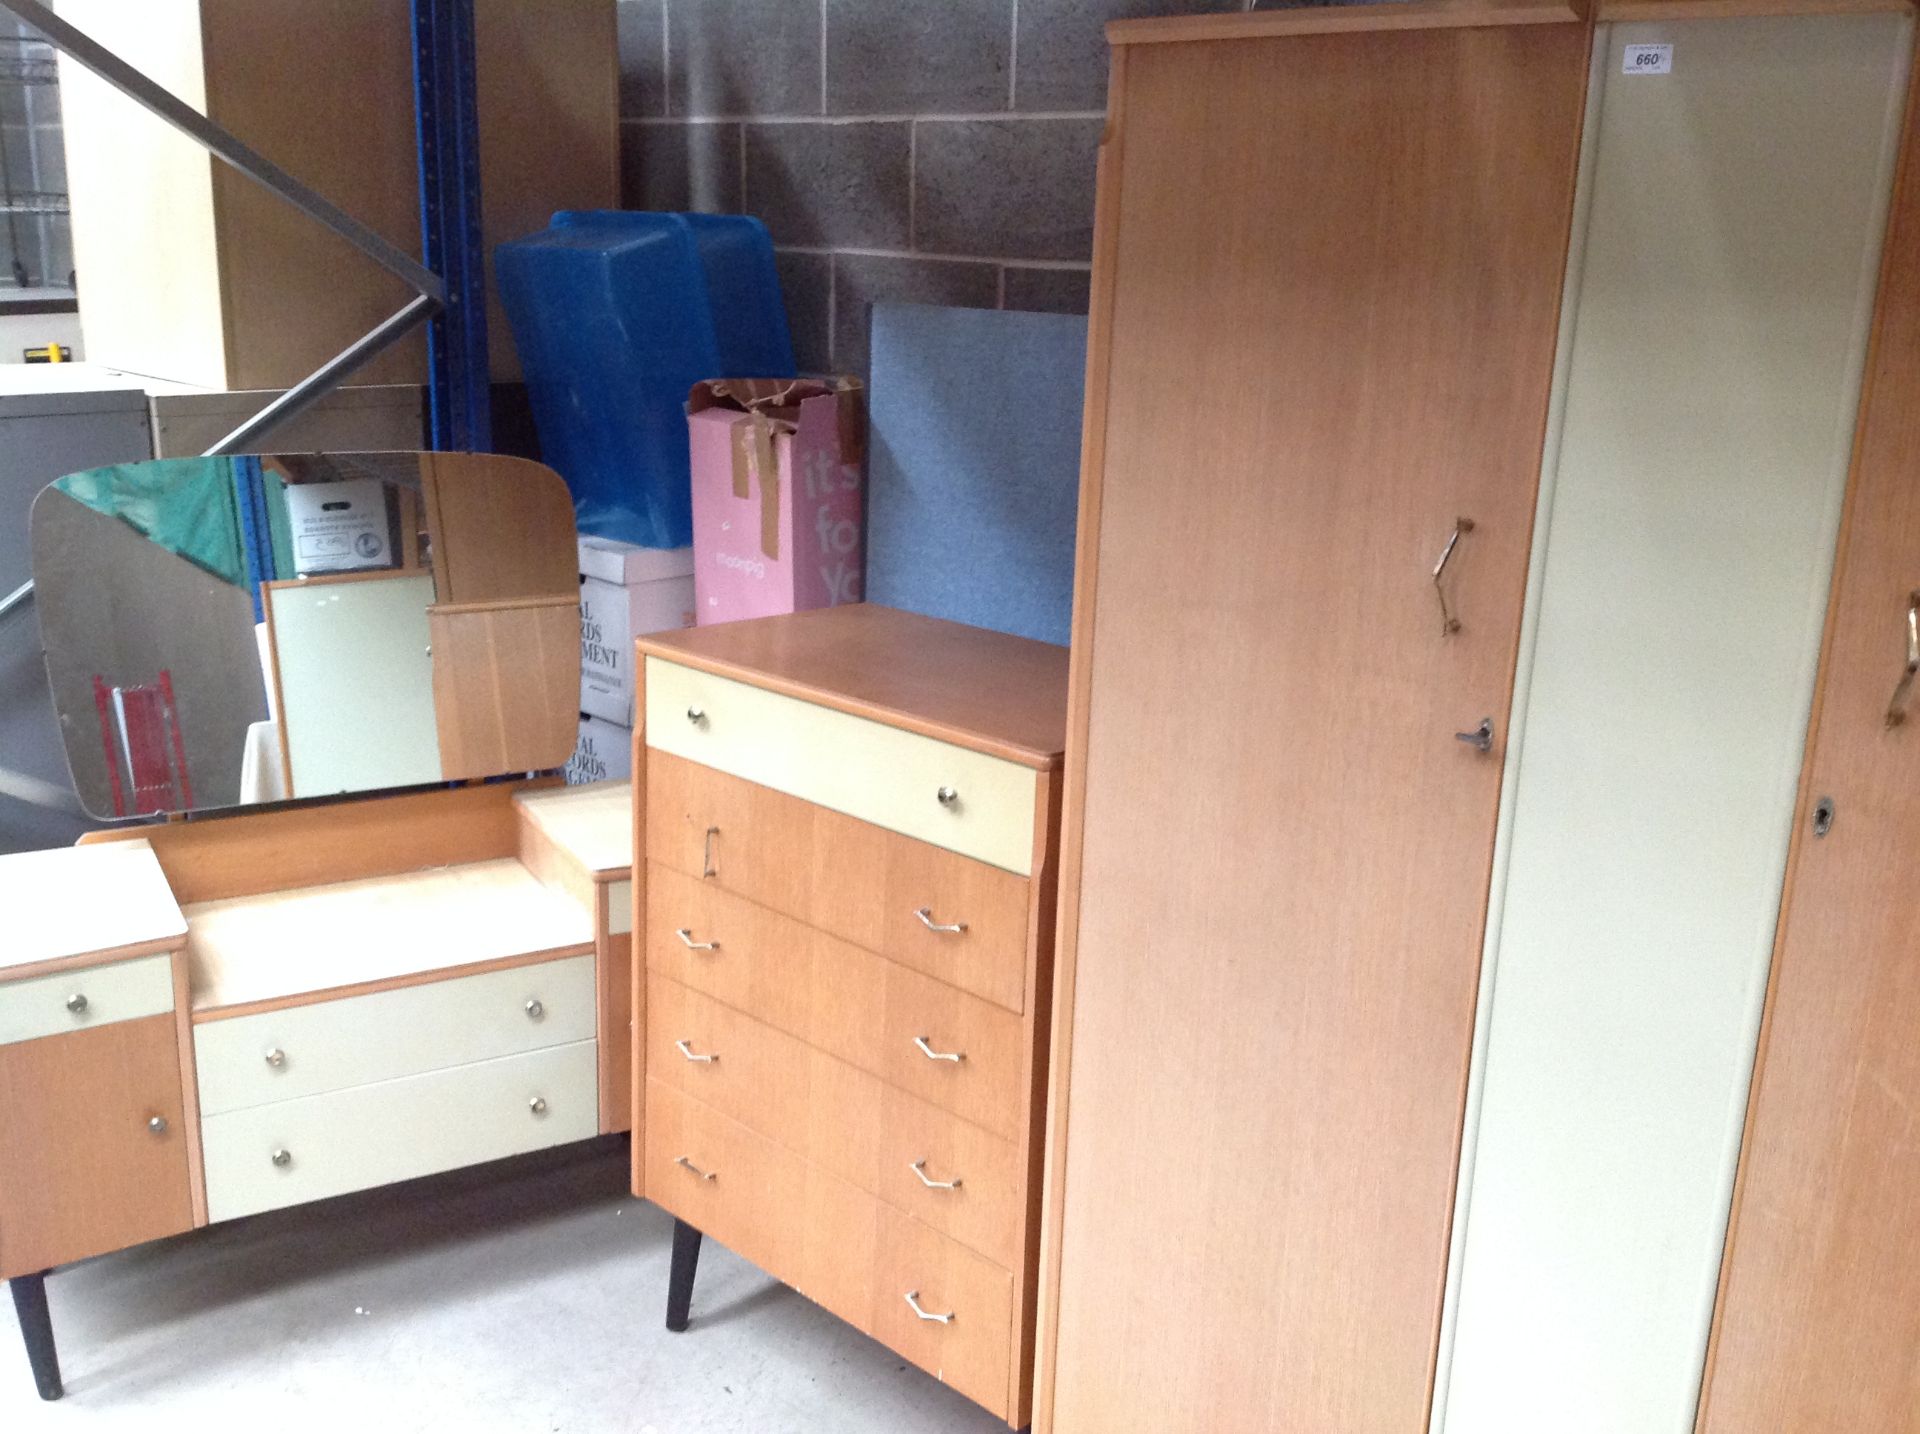 A Remploy teak double door wardrobe 90 x 174cm high and a matching four drawer chest of drawers,